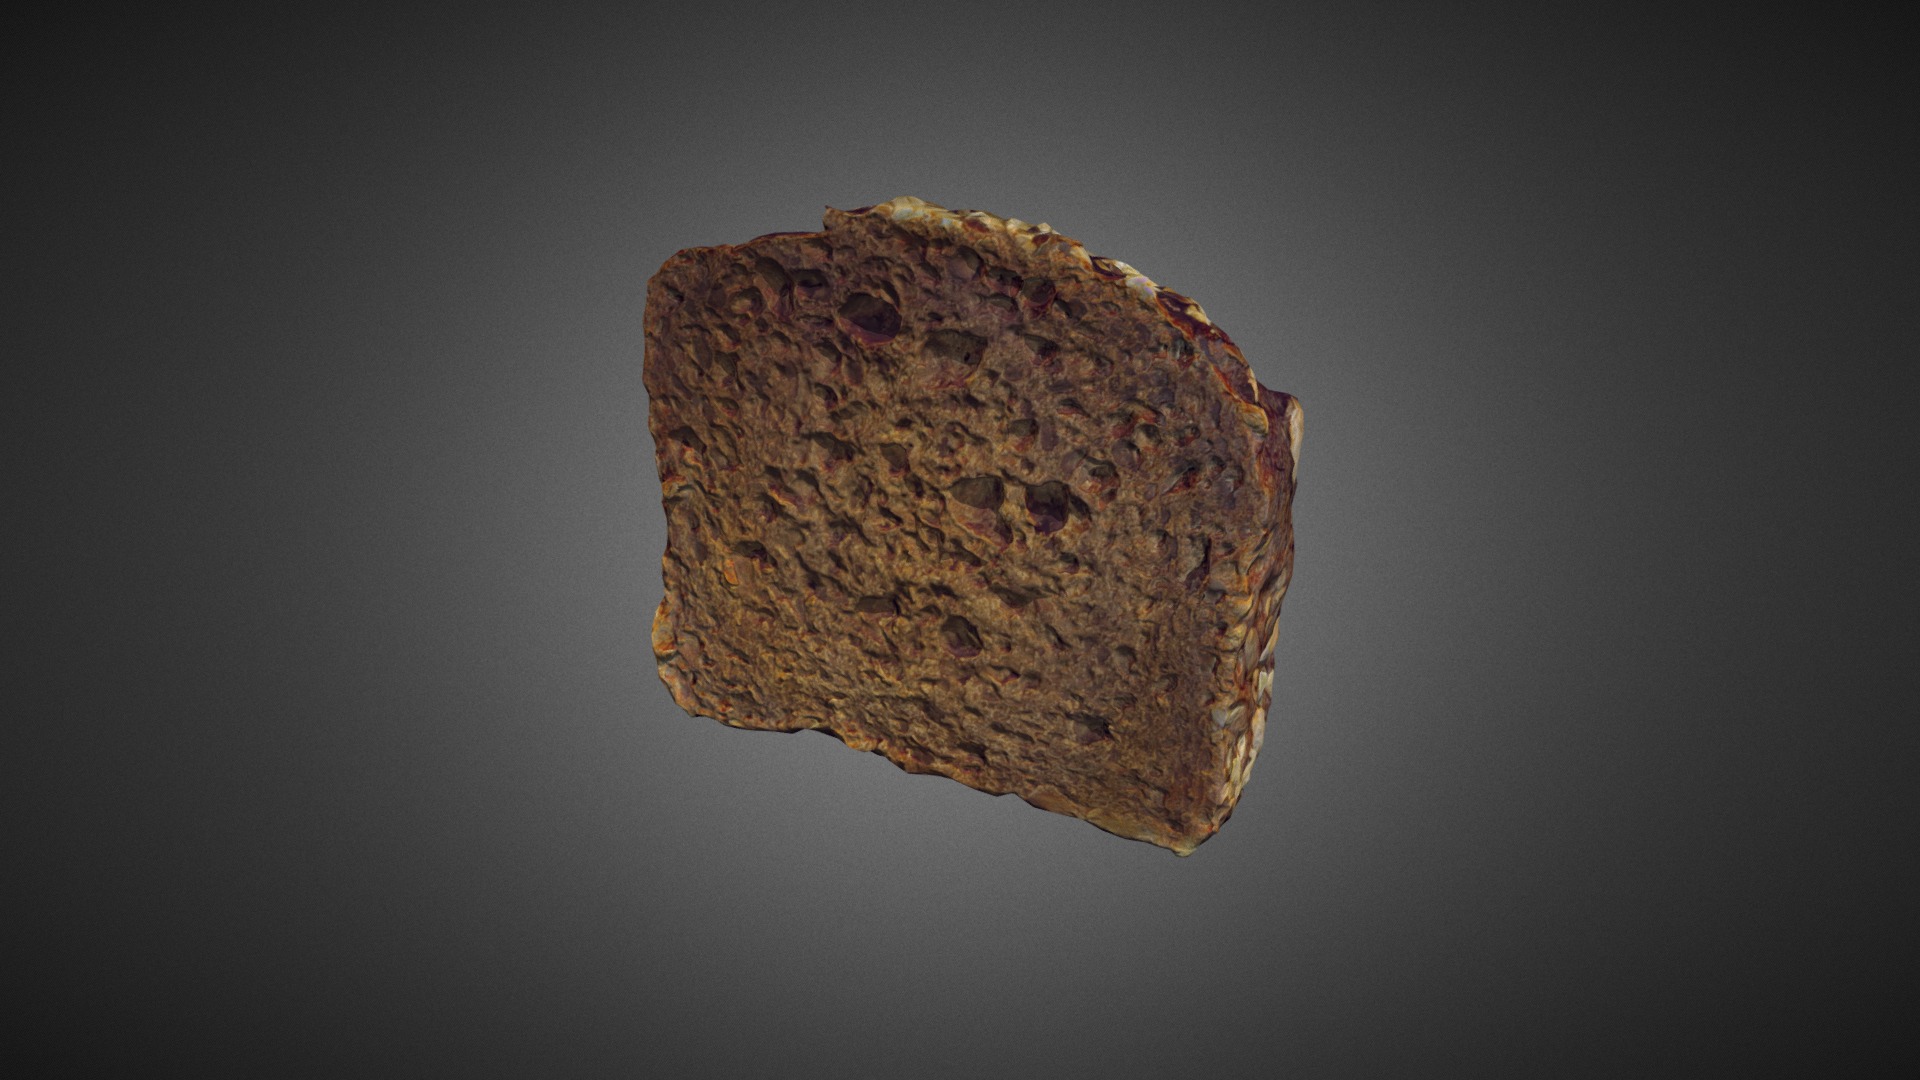 3D model Piece of bread 1 - This is a 3D model of the Piece of bread 1. The 3D model is about a rock with a dark background.